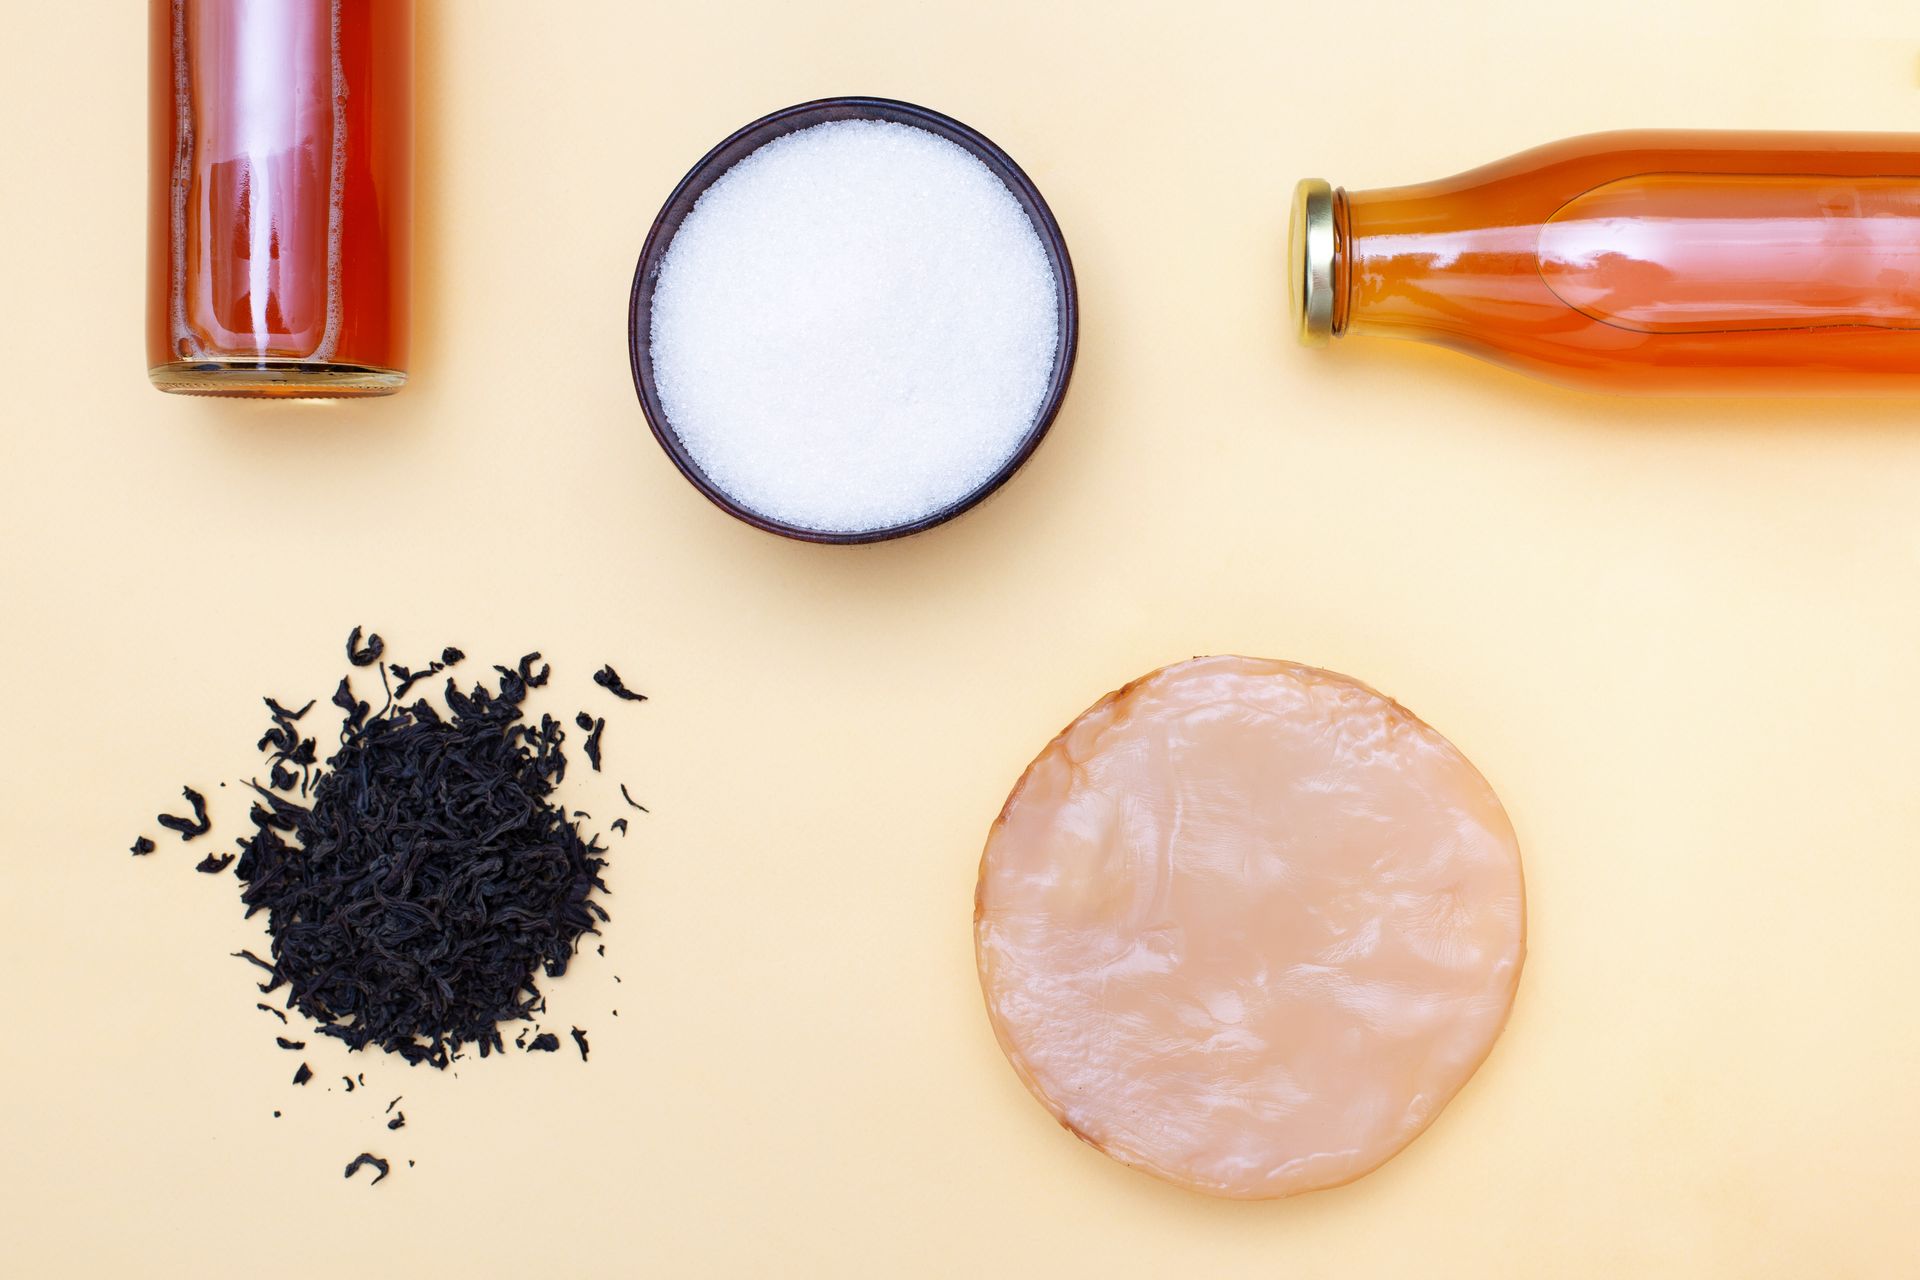 Ingredients to make kombucha, including sugar, tea, and soby - Sugar for Fermentation Products & Non-Food